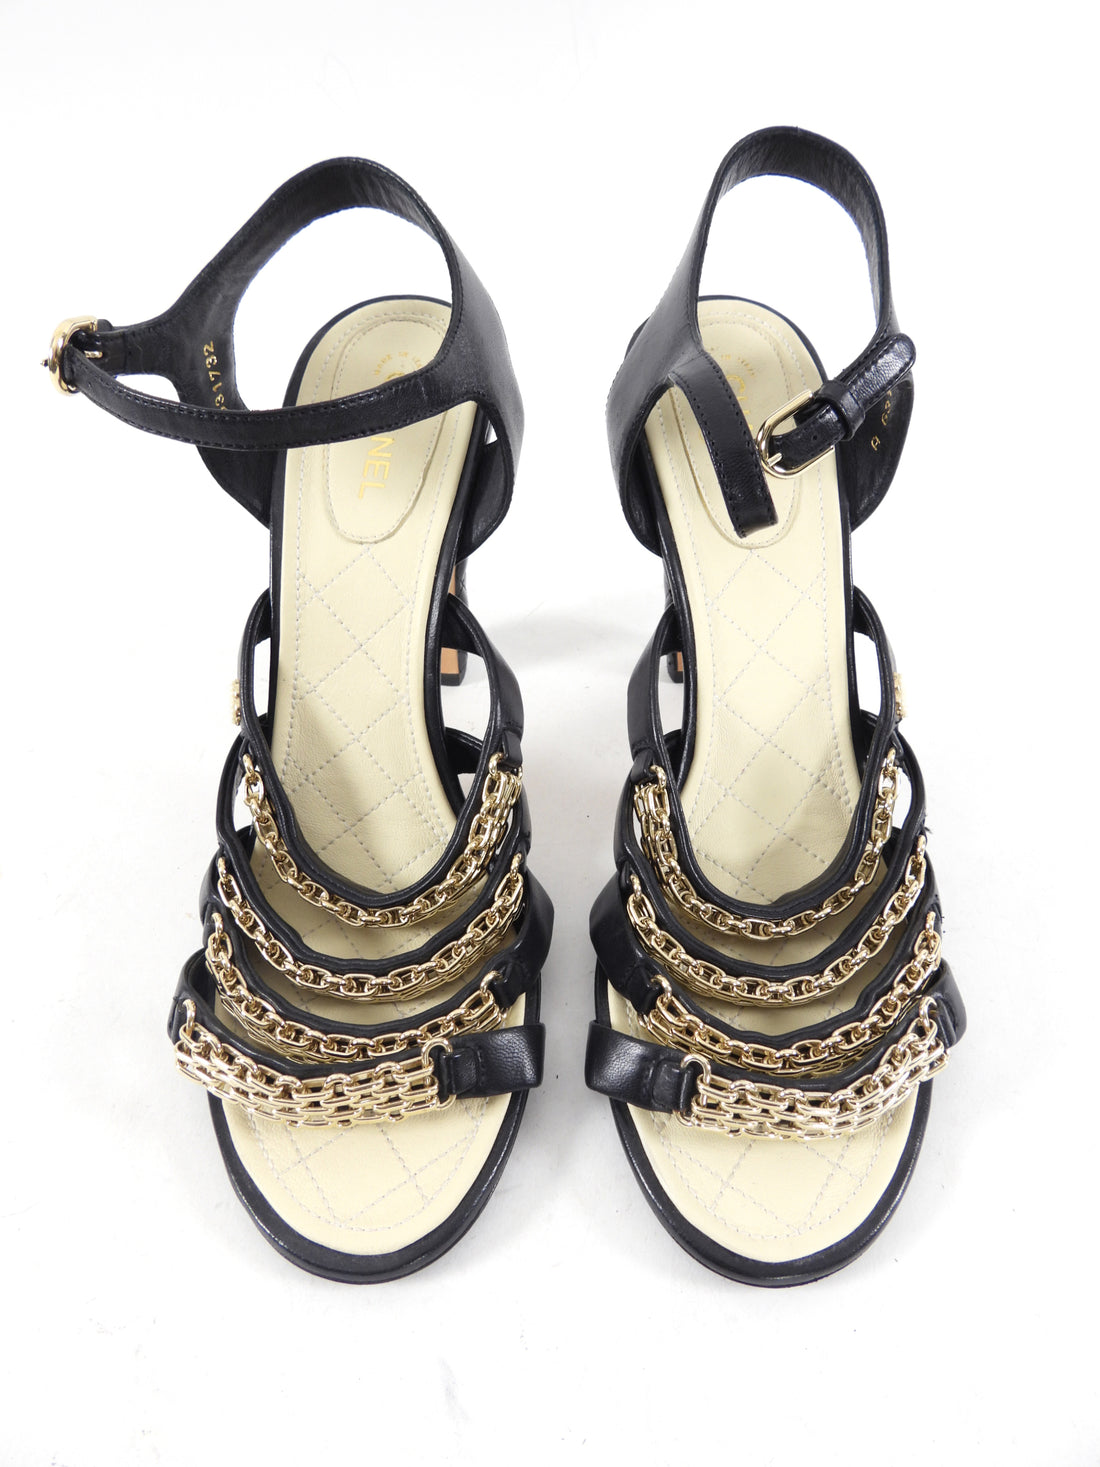 Chanel Black Quilted Gold Mademoiselle Chain Sandals - 41 (Euro 40)